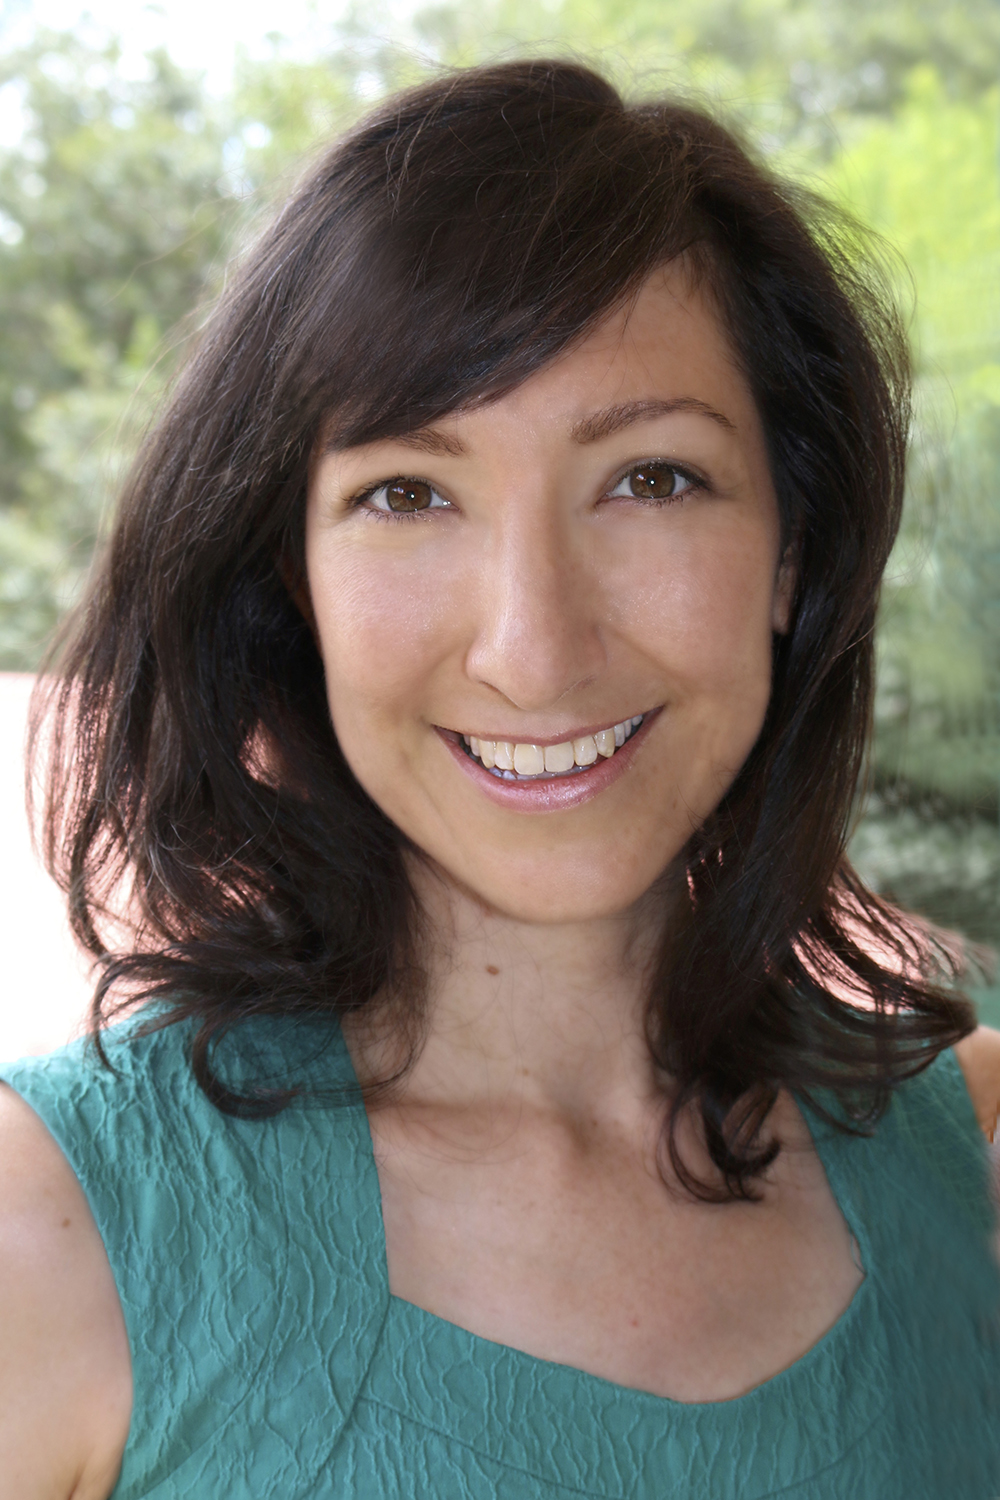 Professional headshot of Hana. She has dark shoulder length hair and is wearing a green top. She is outdoors and smiling. 